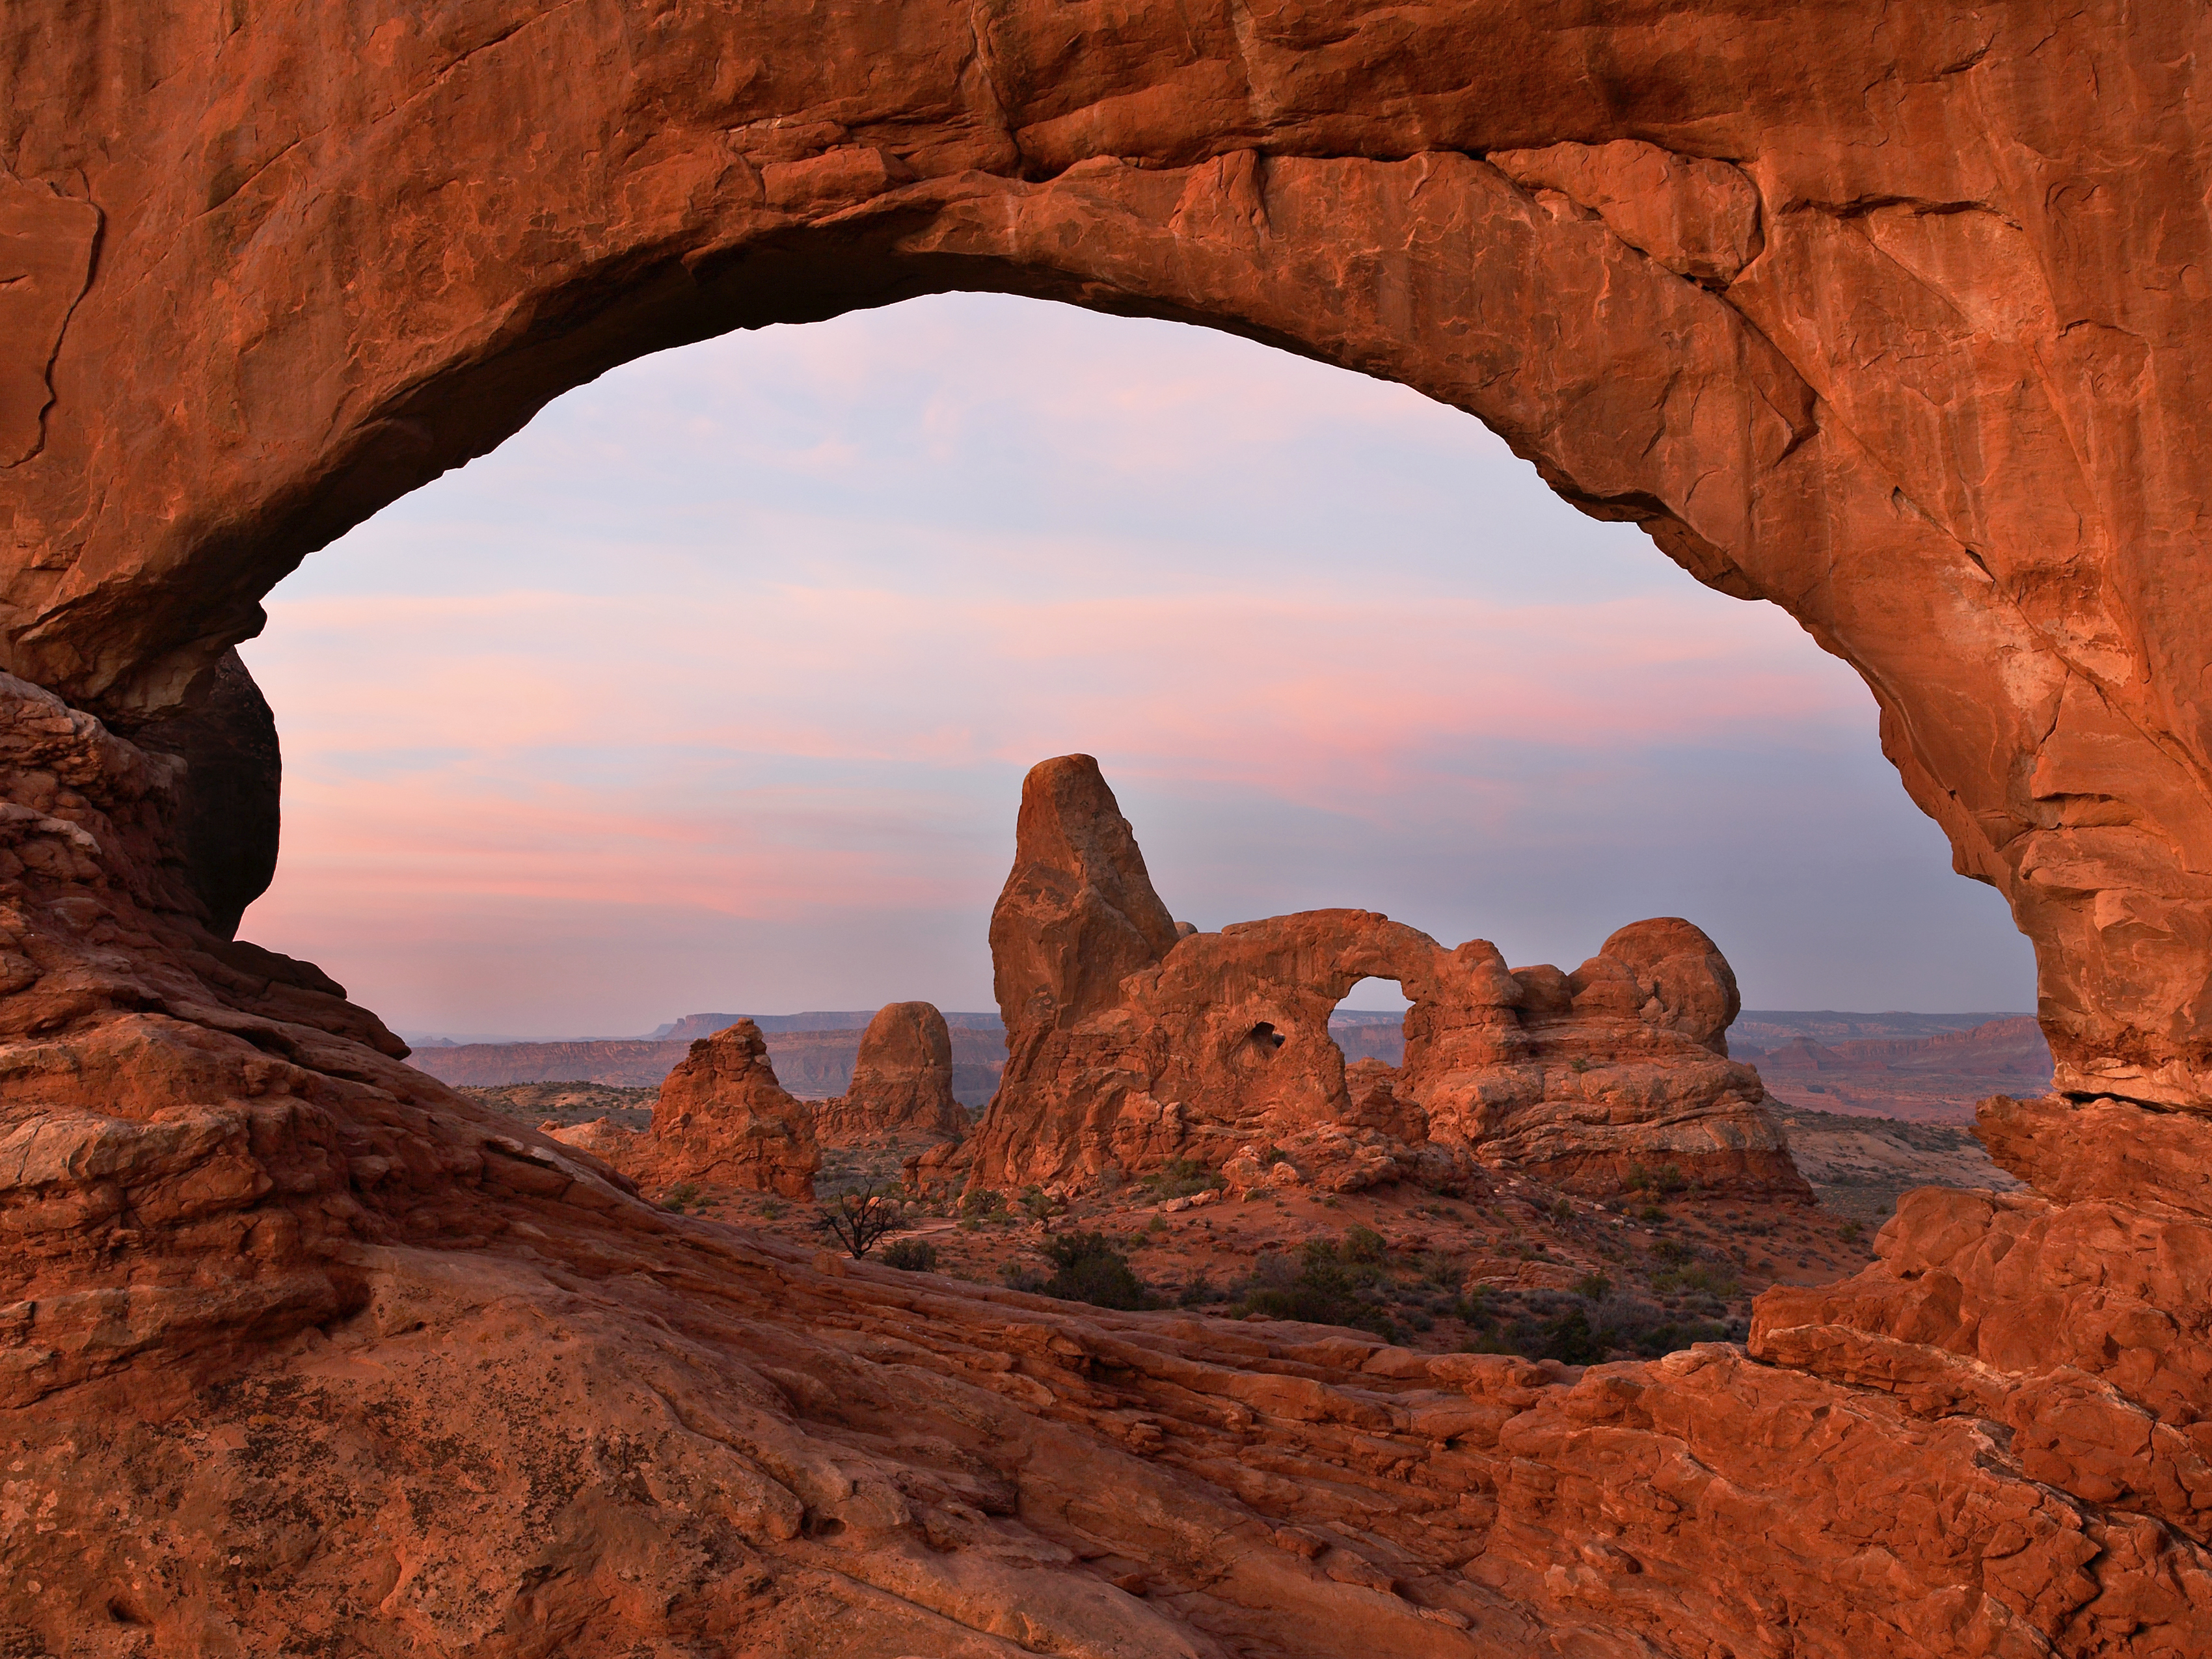 Arches National Park_istock